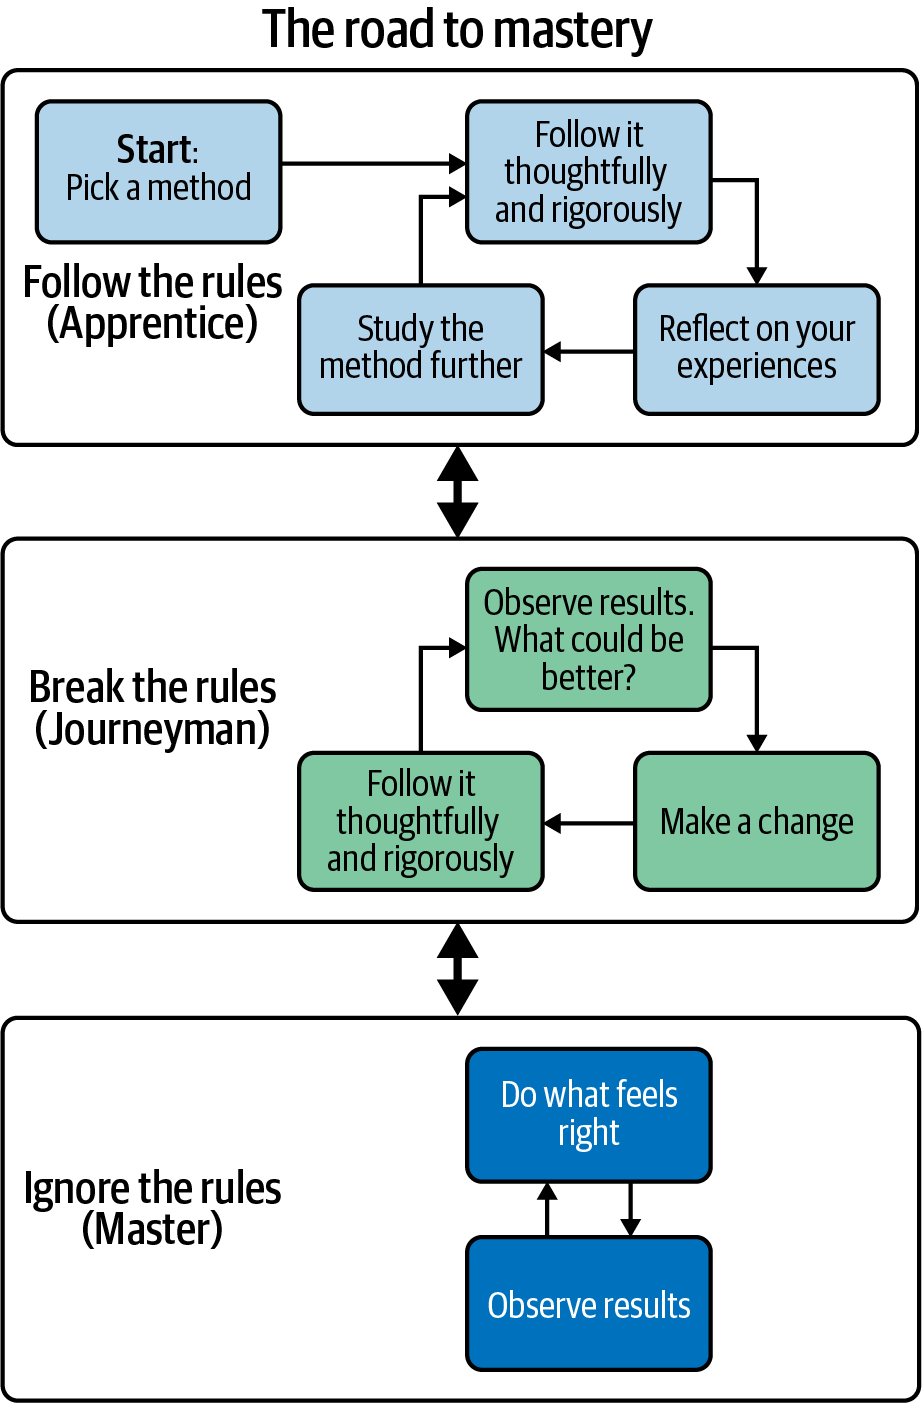 A diagram with three sections, labelled “Follow the Rules (Apprentice),” “Break the Rules (Journeyman),” and “Ignore the Rules (Master).” Each section has double-headed arrows indicated that it’s possible to travel between each section. In the “Follow the Rules” section, a small flow chart starts by saying “Pick a method,” then shows an endless loop from “Follow it thoughtfully and rigorously” to “Reflect on your experiences” to “Study the method further” (and then back to “Follow it thoughtfully and rigorously”). In the “Break the Rules” section, a flow chart shows an endless loop from “Observe results. What could be better?” to “Make a change” to “Follow it thoughtfully and rigorously.” Finally, in the “Ignore the Rules” section, a flow chart shows an endless loop alternating between “Do what feels right” and “Observe results.”